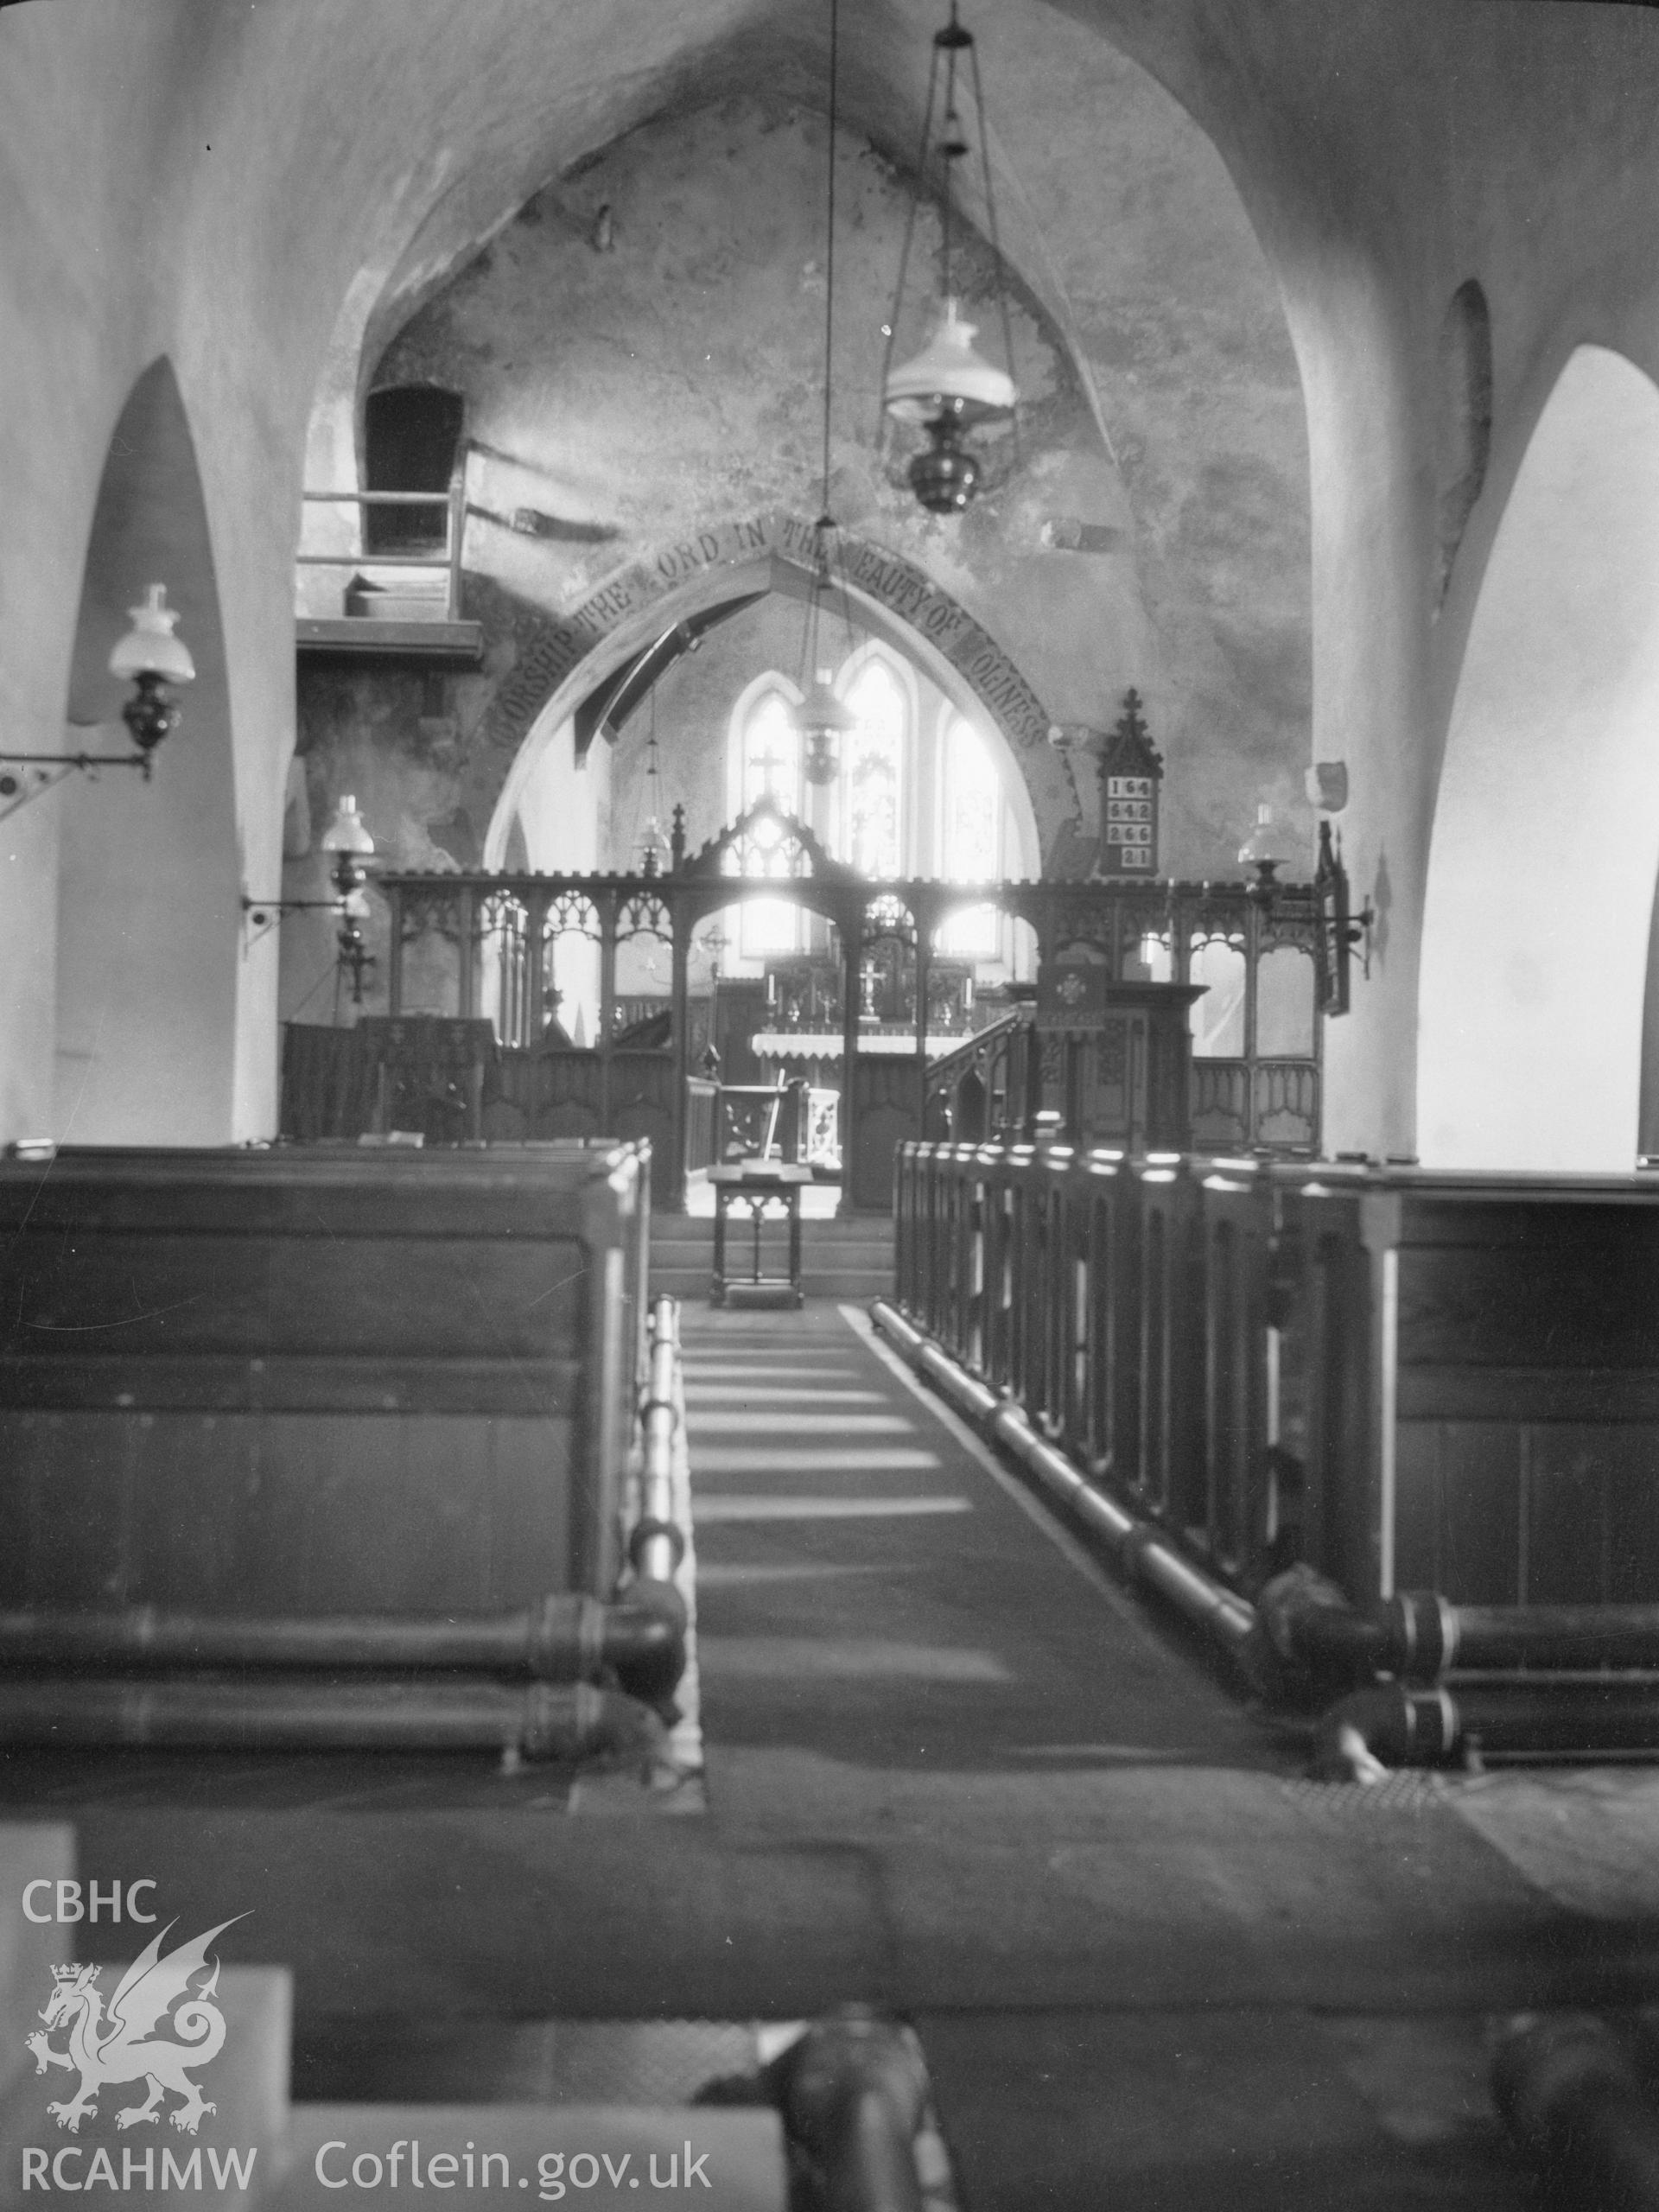 Digital copy of a nitrate negative showing interior view from west, looking towards the altar, St James's Church, Manorbier. From the National Building Record Postcard Collection.